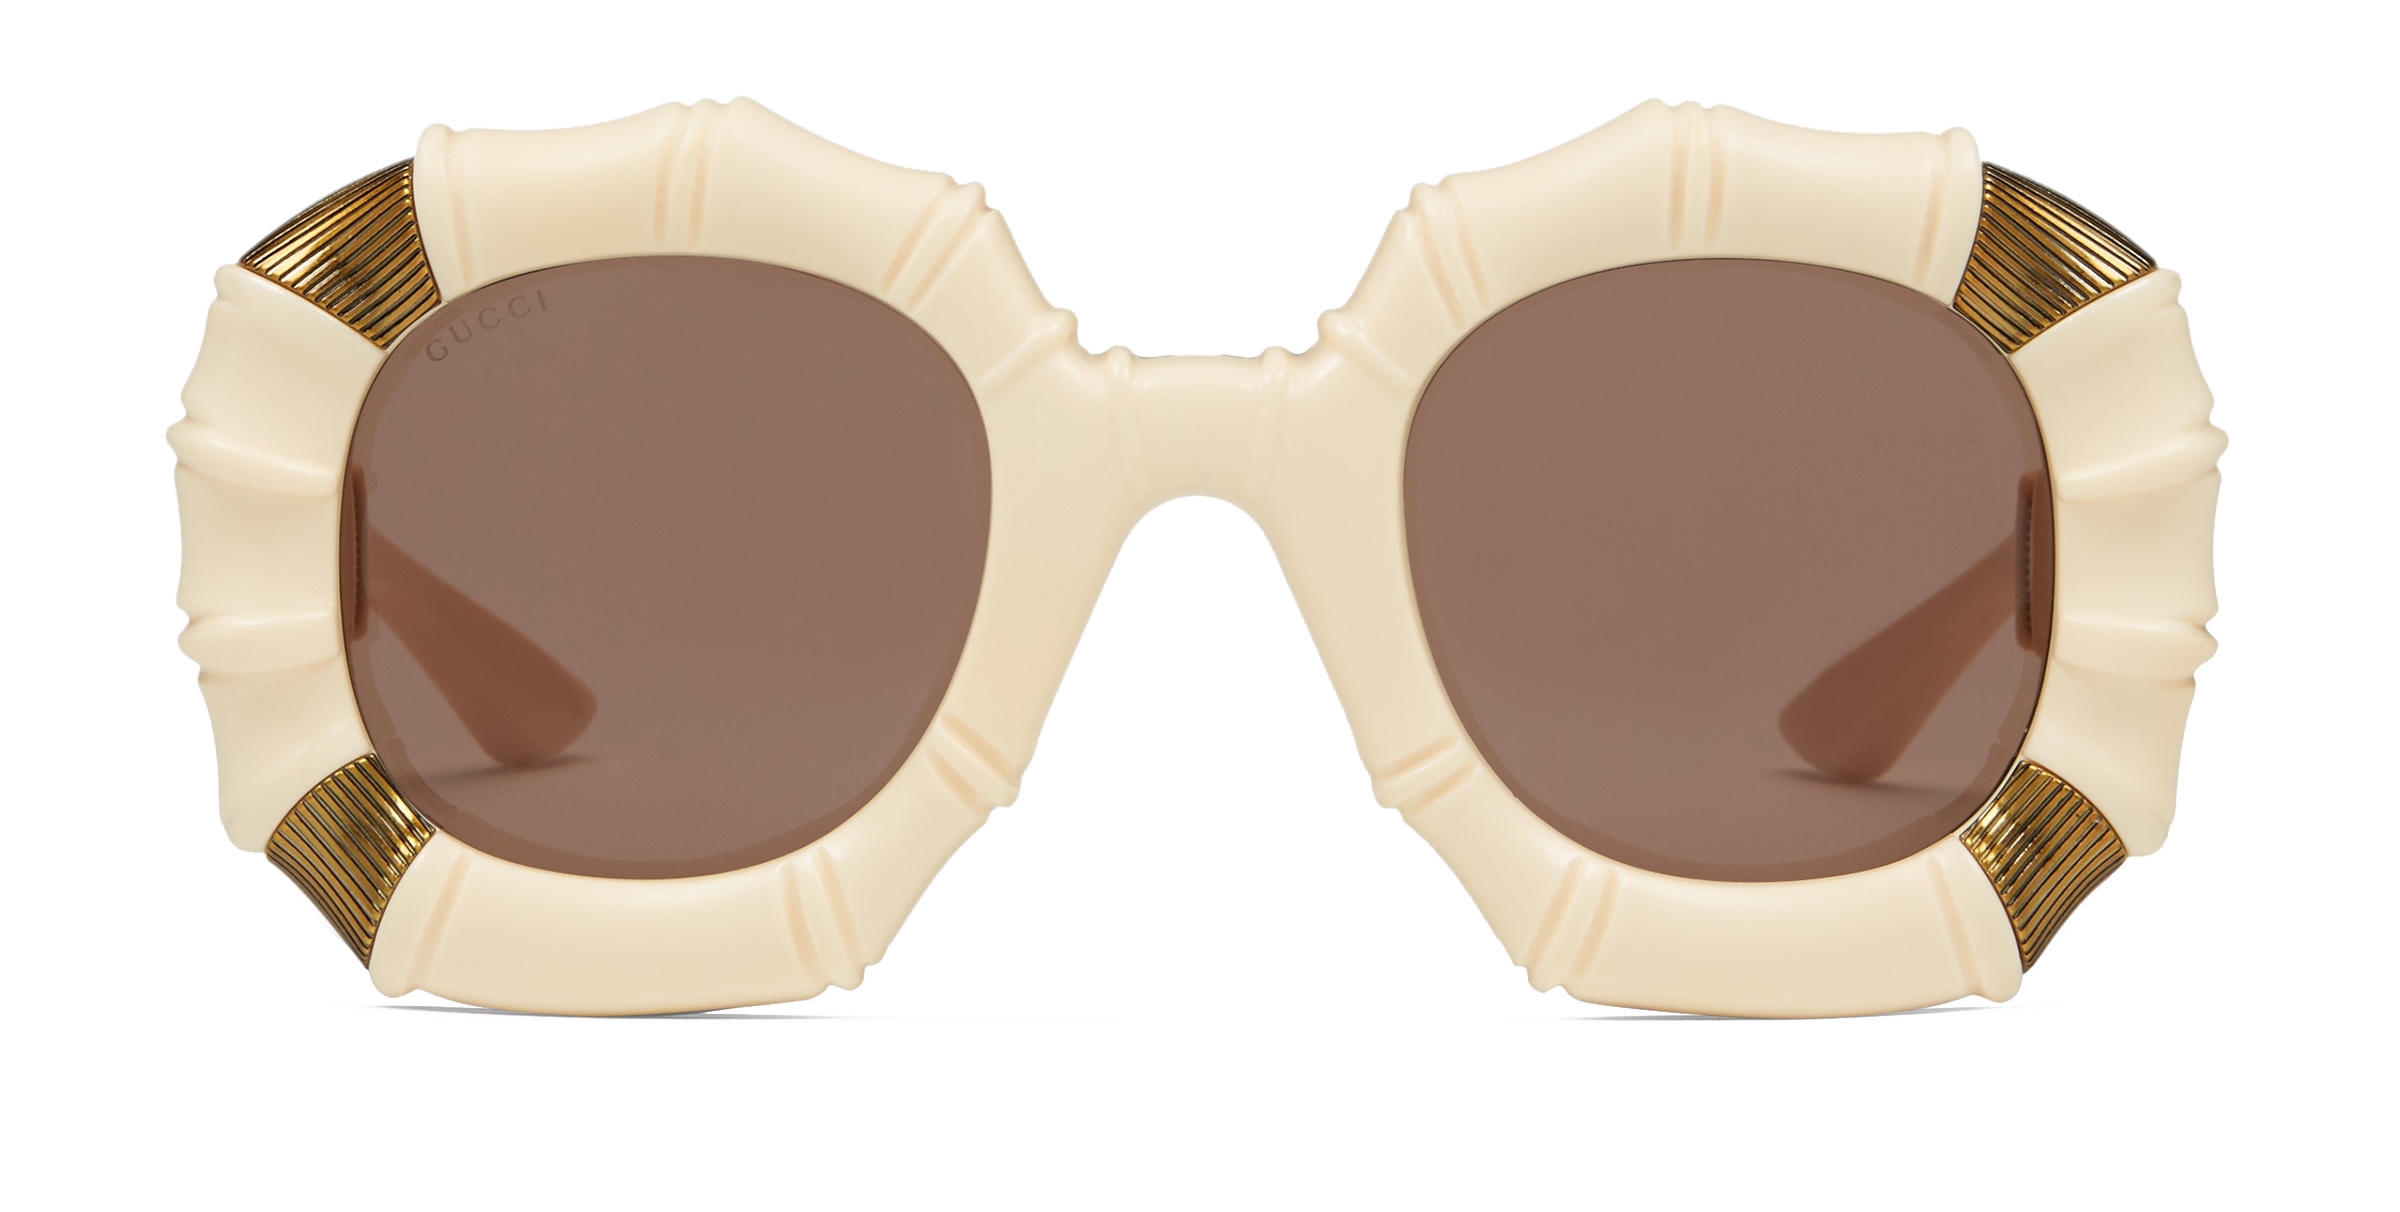 Gucci - Round Sunglasses with Metal Details - Ivory - Gucci Eyewear -  Avvenice